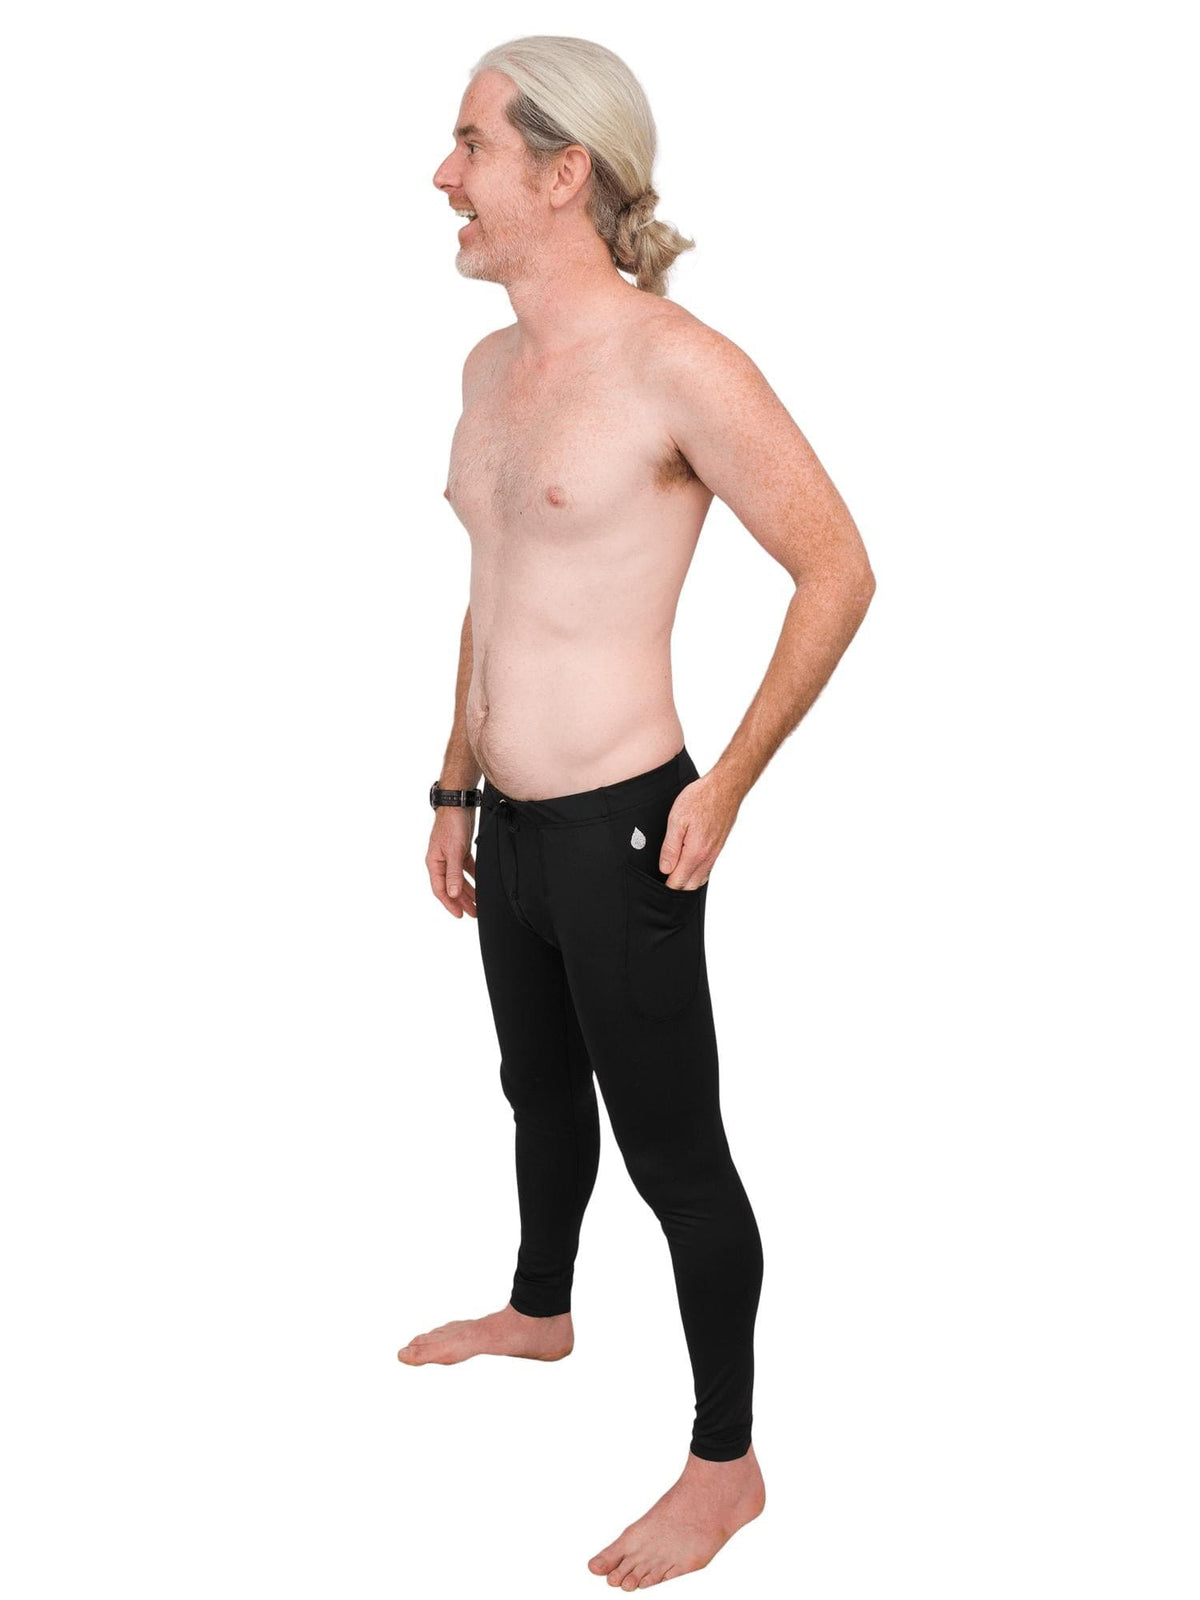 Model: Patrick is the CEO and founder of Waterlust. He is 6&#39;1&quot;, 175lbs and wearing a size L legging.